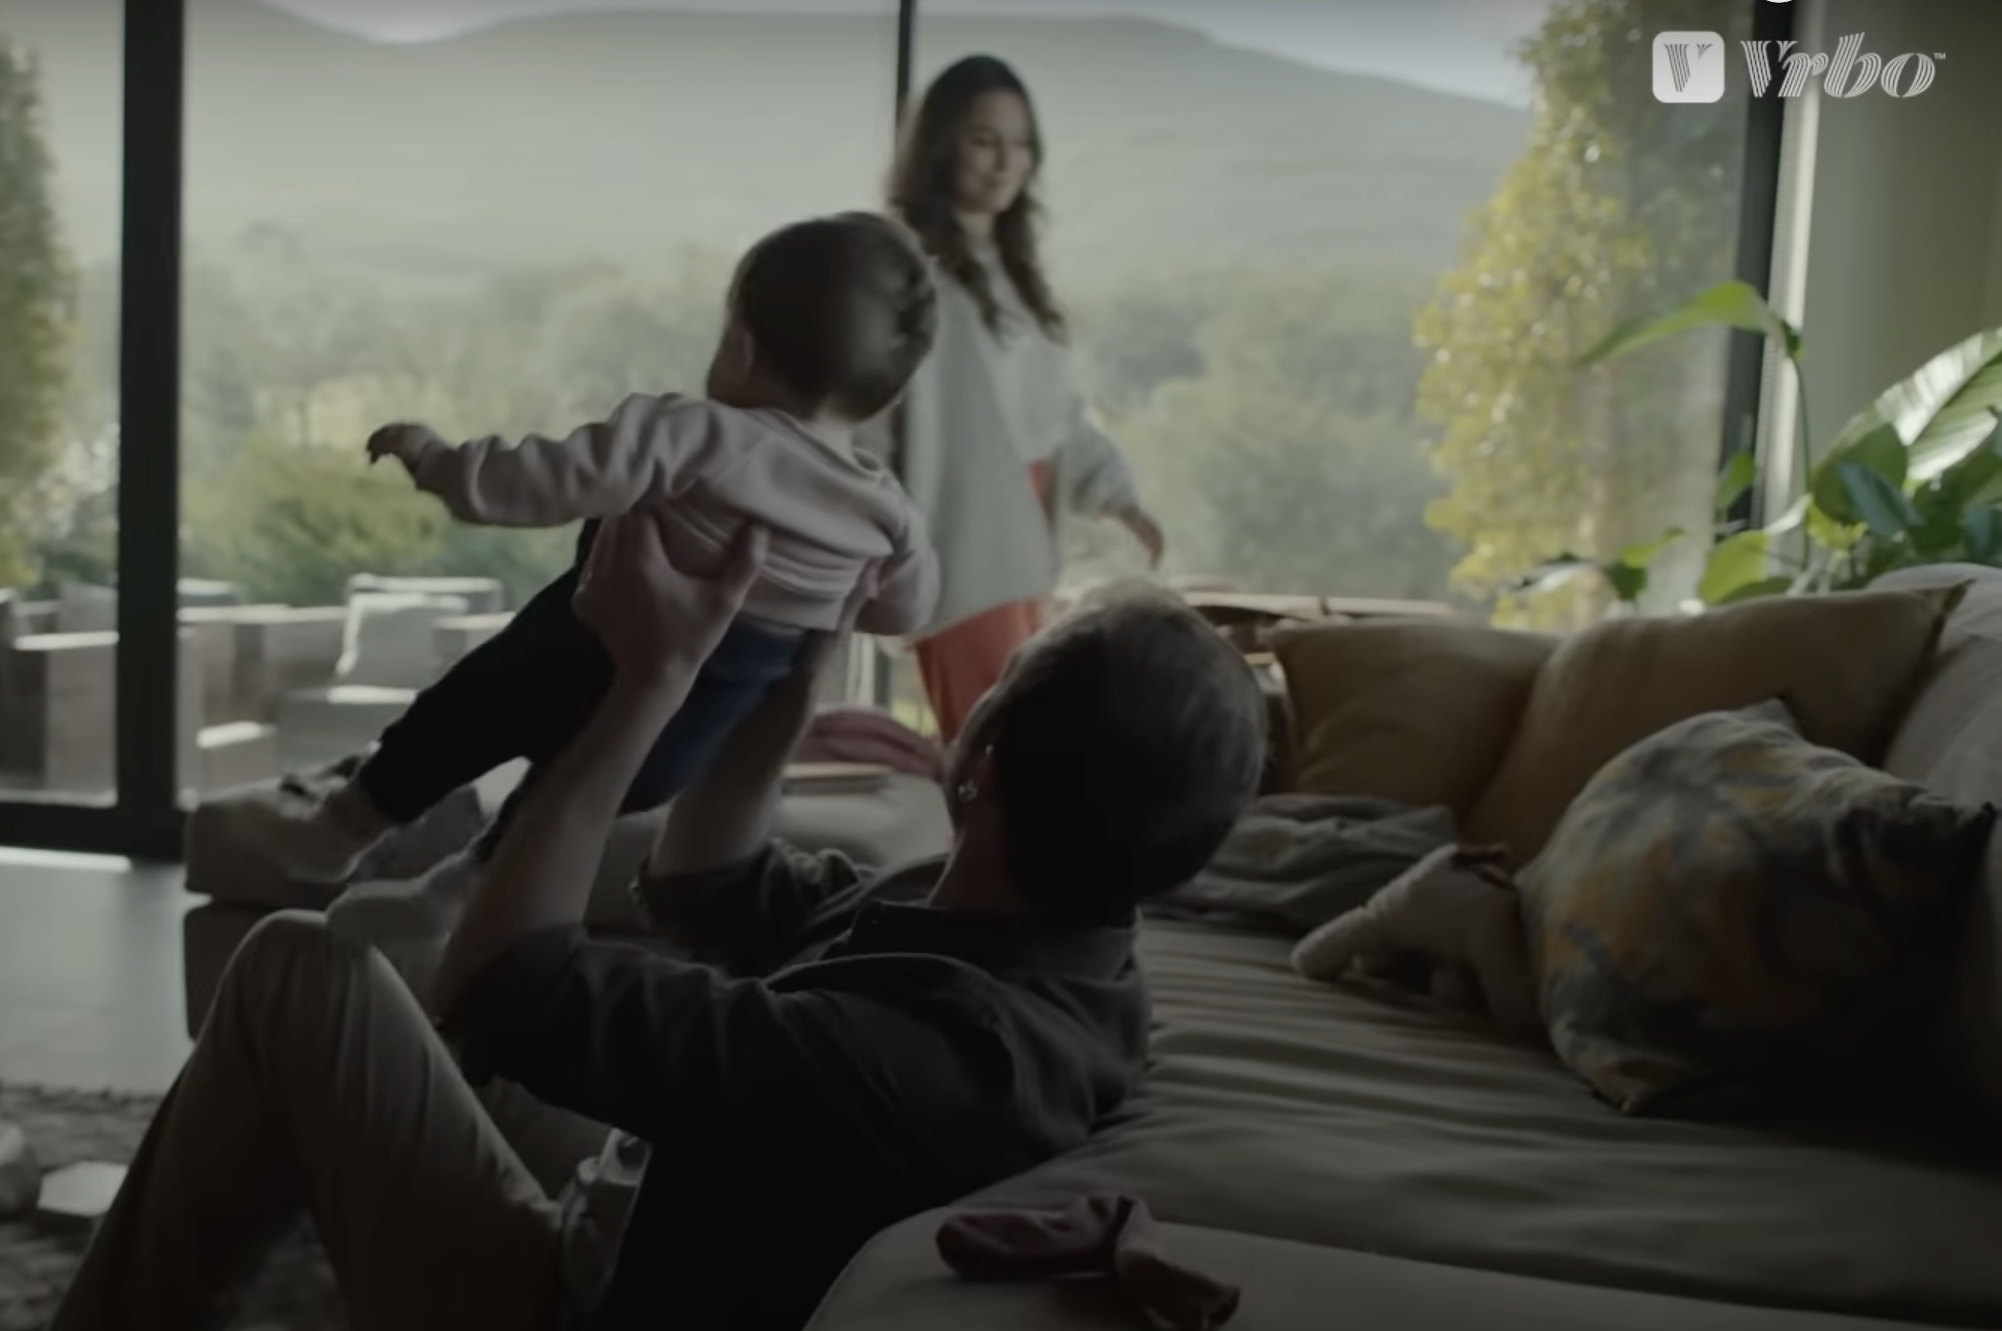 Vrbo released the first of three new ads this week focusing on customer service guarantees instead of the homes themselves. Pictured is a screen grab from the first ad, Good Surprises. Source: Vrbo